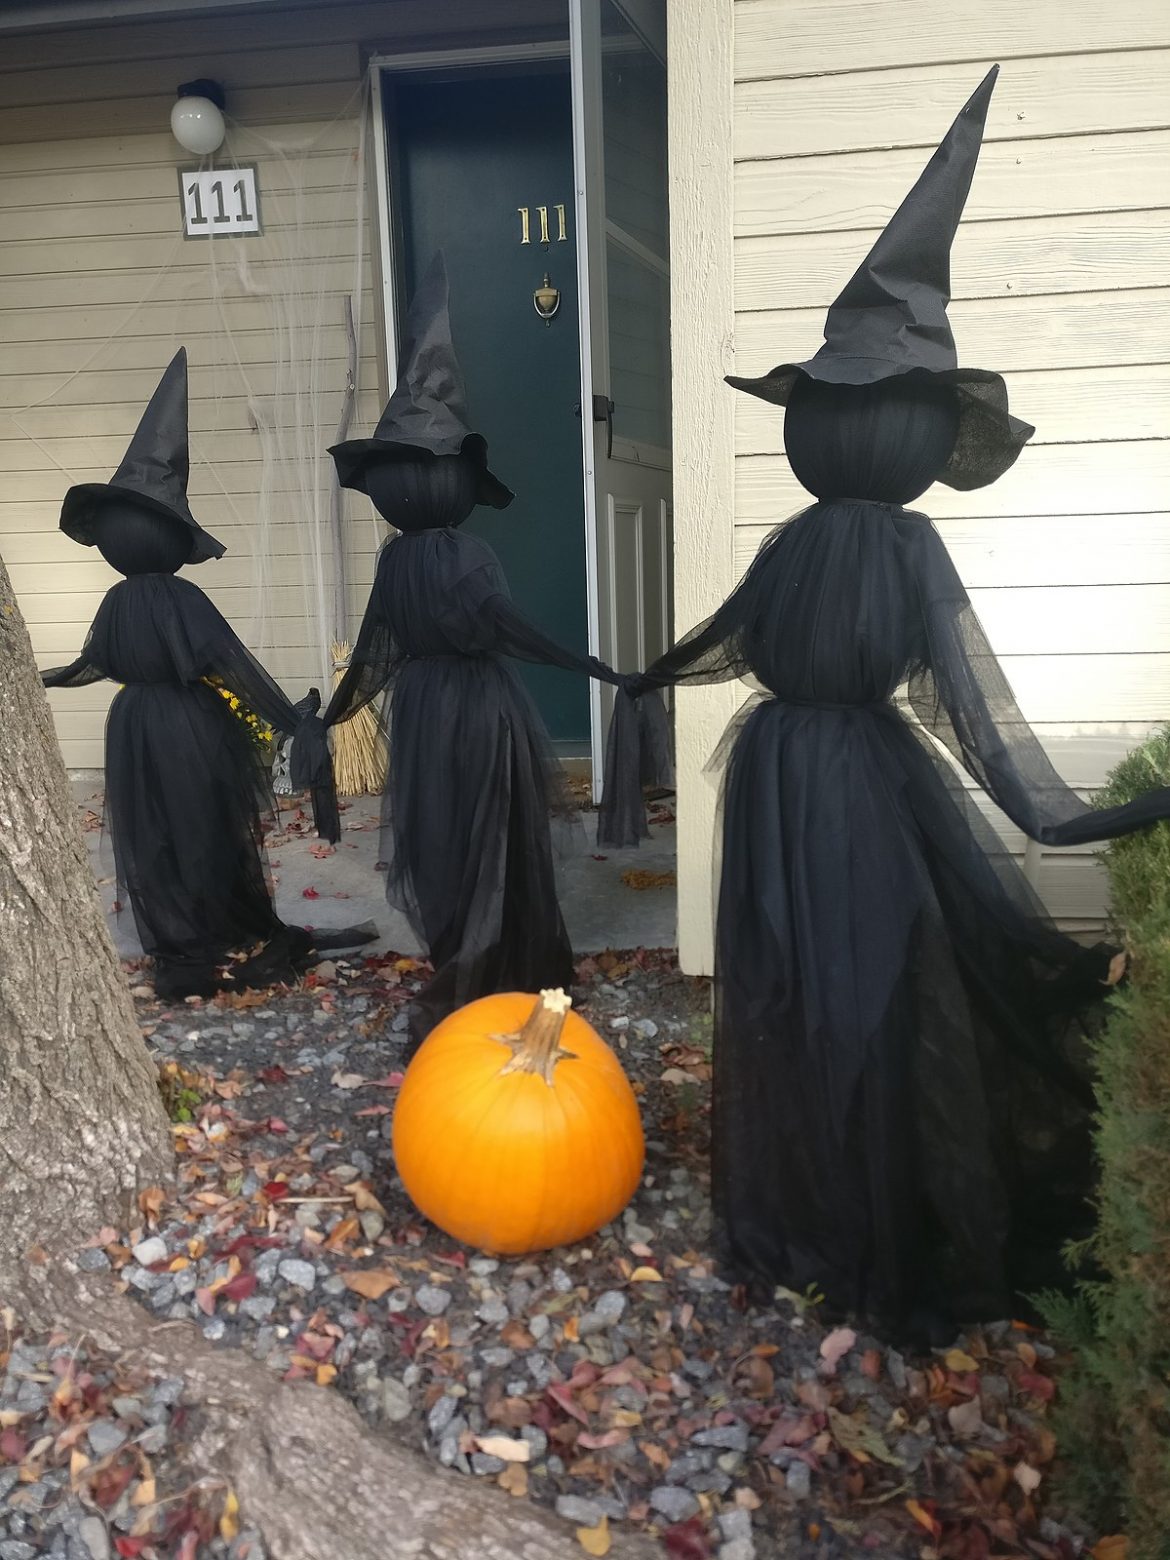 28 Oh-So-Spooky Halloween Home Decorations